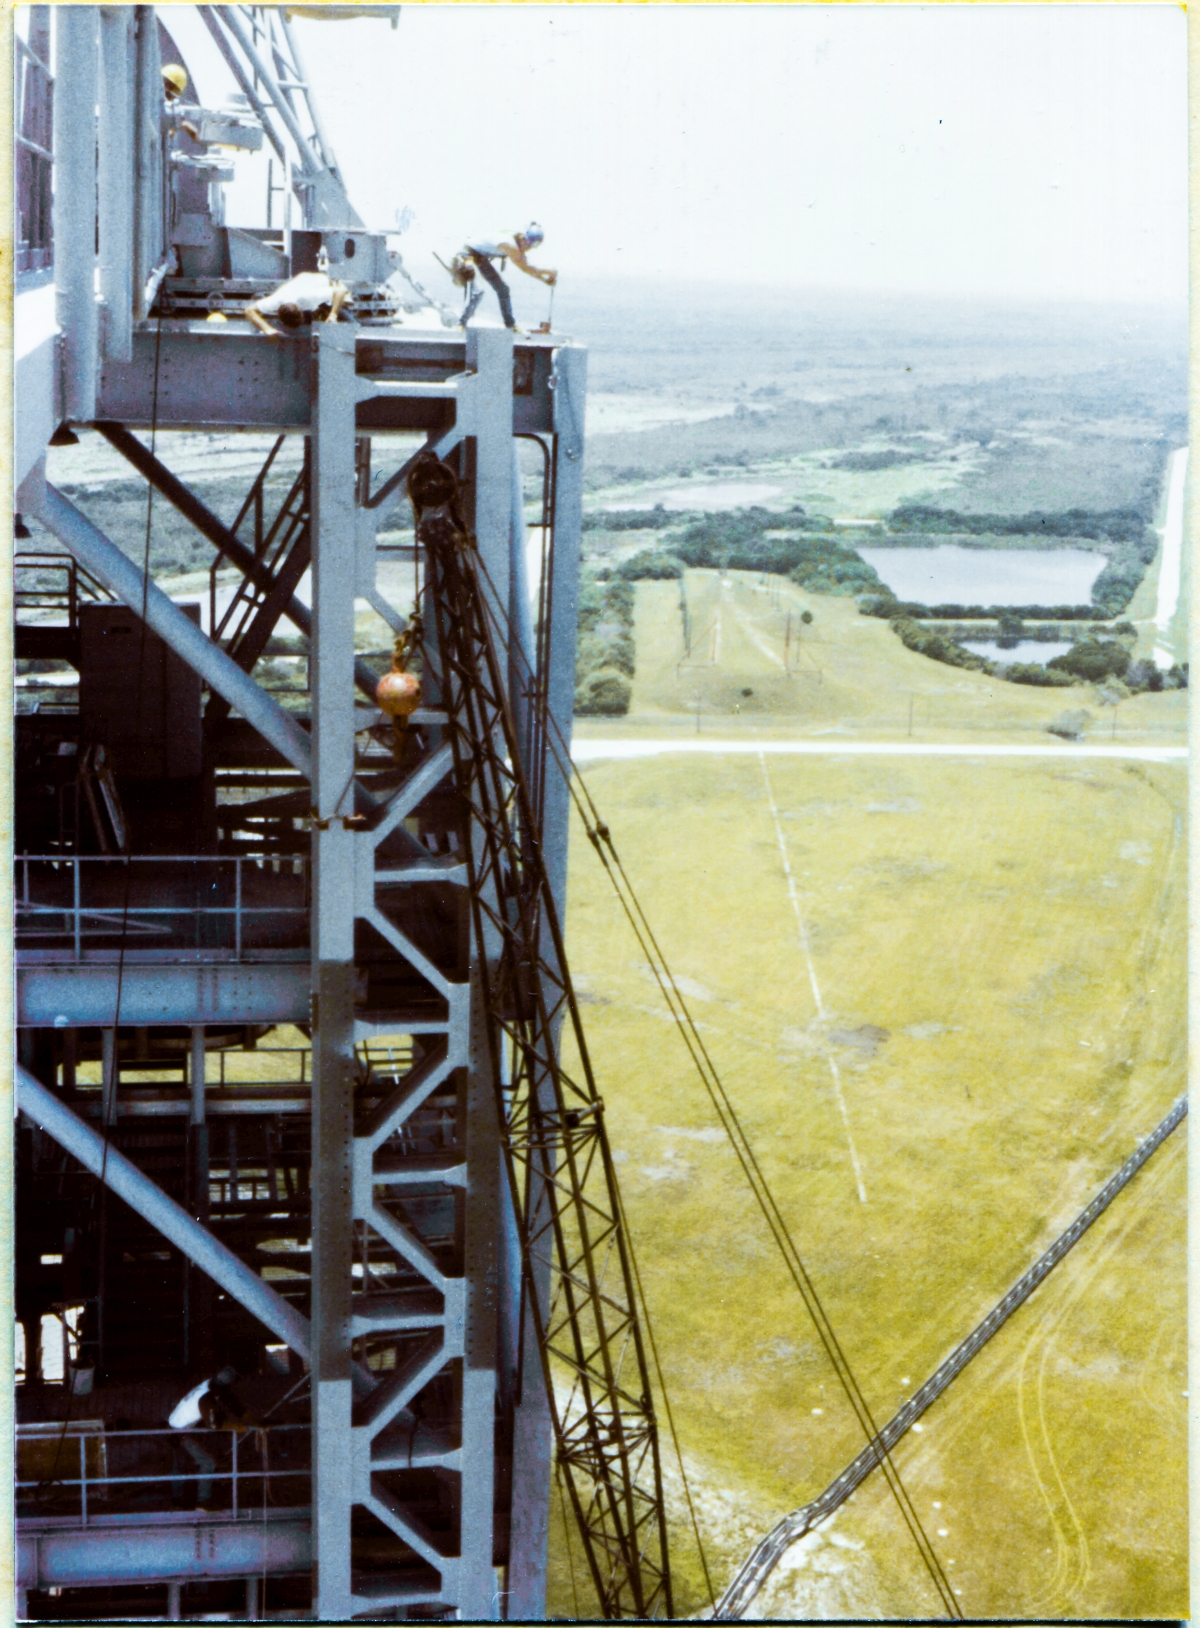 Image 083. Union Ironworker James Dixon has placed a loop of wire rope around the top of the GOX Arm Hinges Support Strongback, and is standing on top of the Fixed Service Structure at Space Shuttle Launch Complex 39-B, Kennedy Space Center, Florida, at Elevation 300'-0”, no handrails, wearing no safety harness or other gear, as was common practice in the early 1980's, working the come-along that the wire rope has been threaded to, via an unseen snatch block which is hidden behind the Strongback. Main force is now being applied, and the top of the Strongback is in hard contact with the web of the Perimeter Framing Beam of the FSS, scraping along against it as it is urged ever northward by the action of the come-along, having been shoved into that hard contact by the further action of other Union Ironworkers two levels down, at Elevation 260'-0”, who are slowly tensioning the wire rope around the second-to-bottom horizontal bracing member at the lower end of the Strongback, forcing it into a more-vertical orientation, going against its natural tendency to hang at an angle because of where its lifting sling remains attached, roughly one-third down from its top. The Strongback is not yet fully vertical and is only contacting the FSS at its top connection point. Below that, the other two connection points remain out of contact, and the Strongback is still reasonably free to be pushed side-to-side, along the face of the FSS. At top and bottom, other Union Ironworkers are in constant communication with the rest of the gang, closely-monitoring the position of the Strongback and its connection points. Photo by James MacLaren.